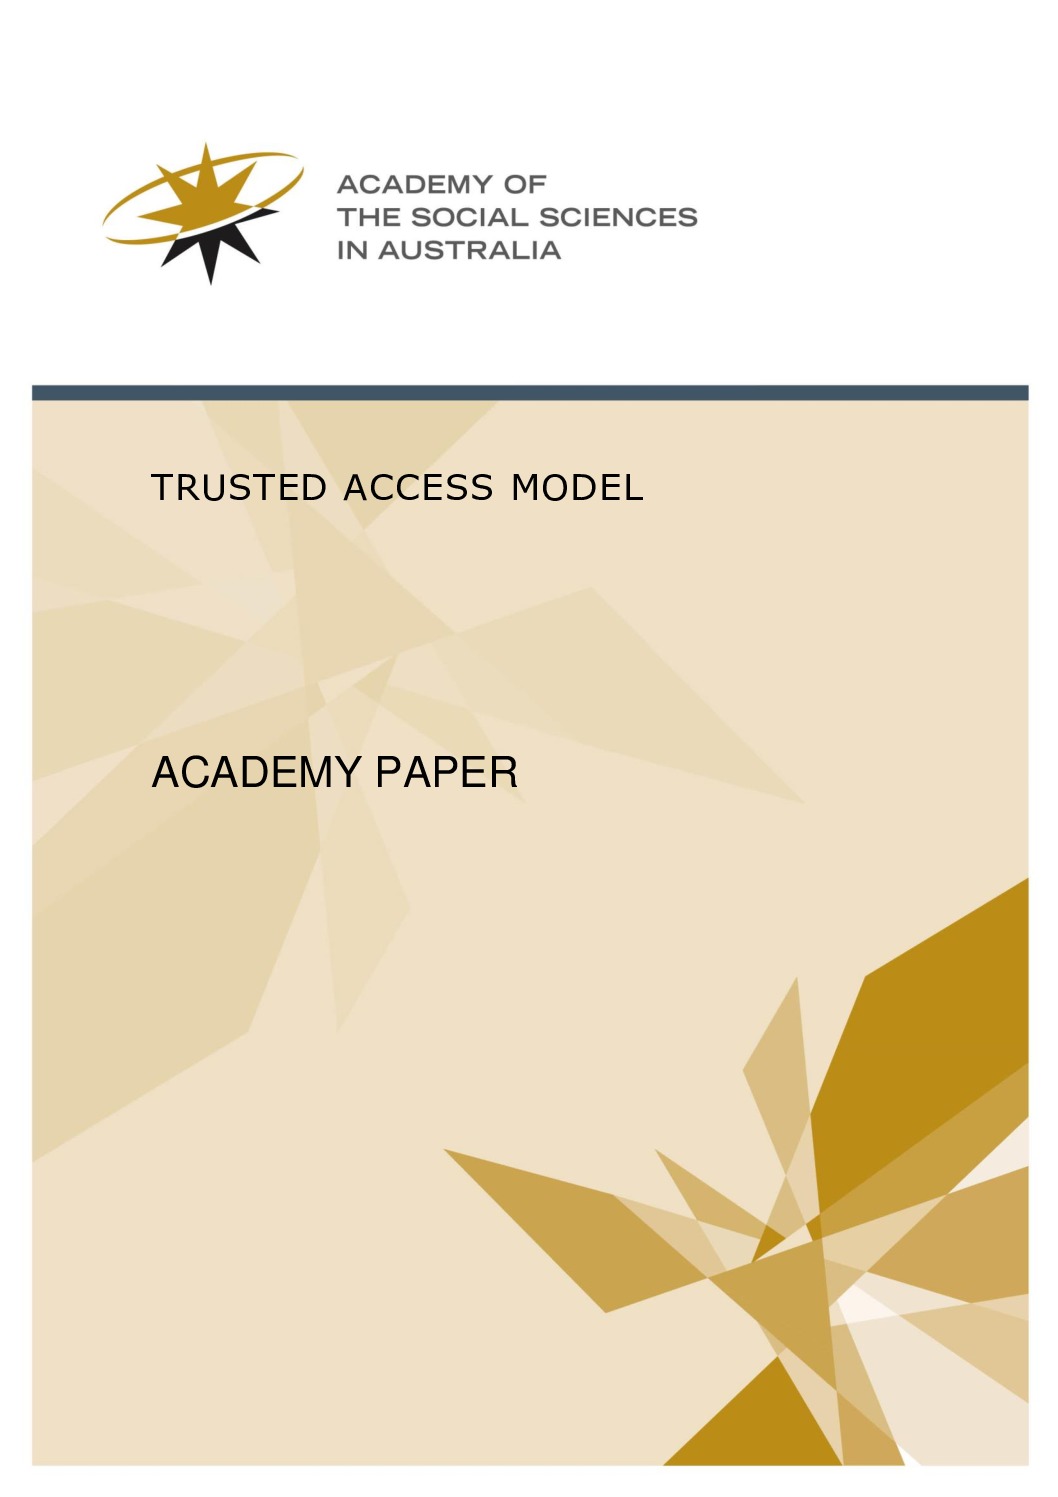 Academy Paper 4 2016 Trusted Access Model pdf 1